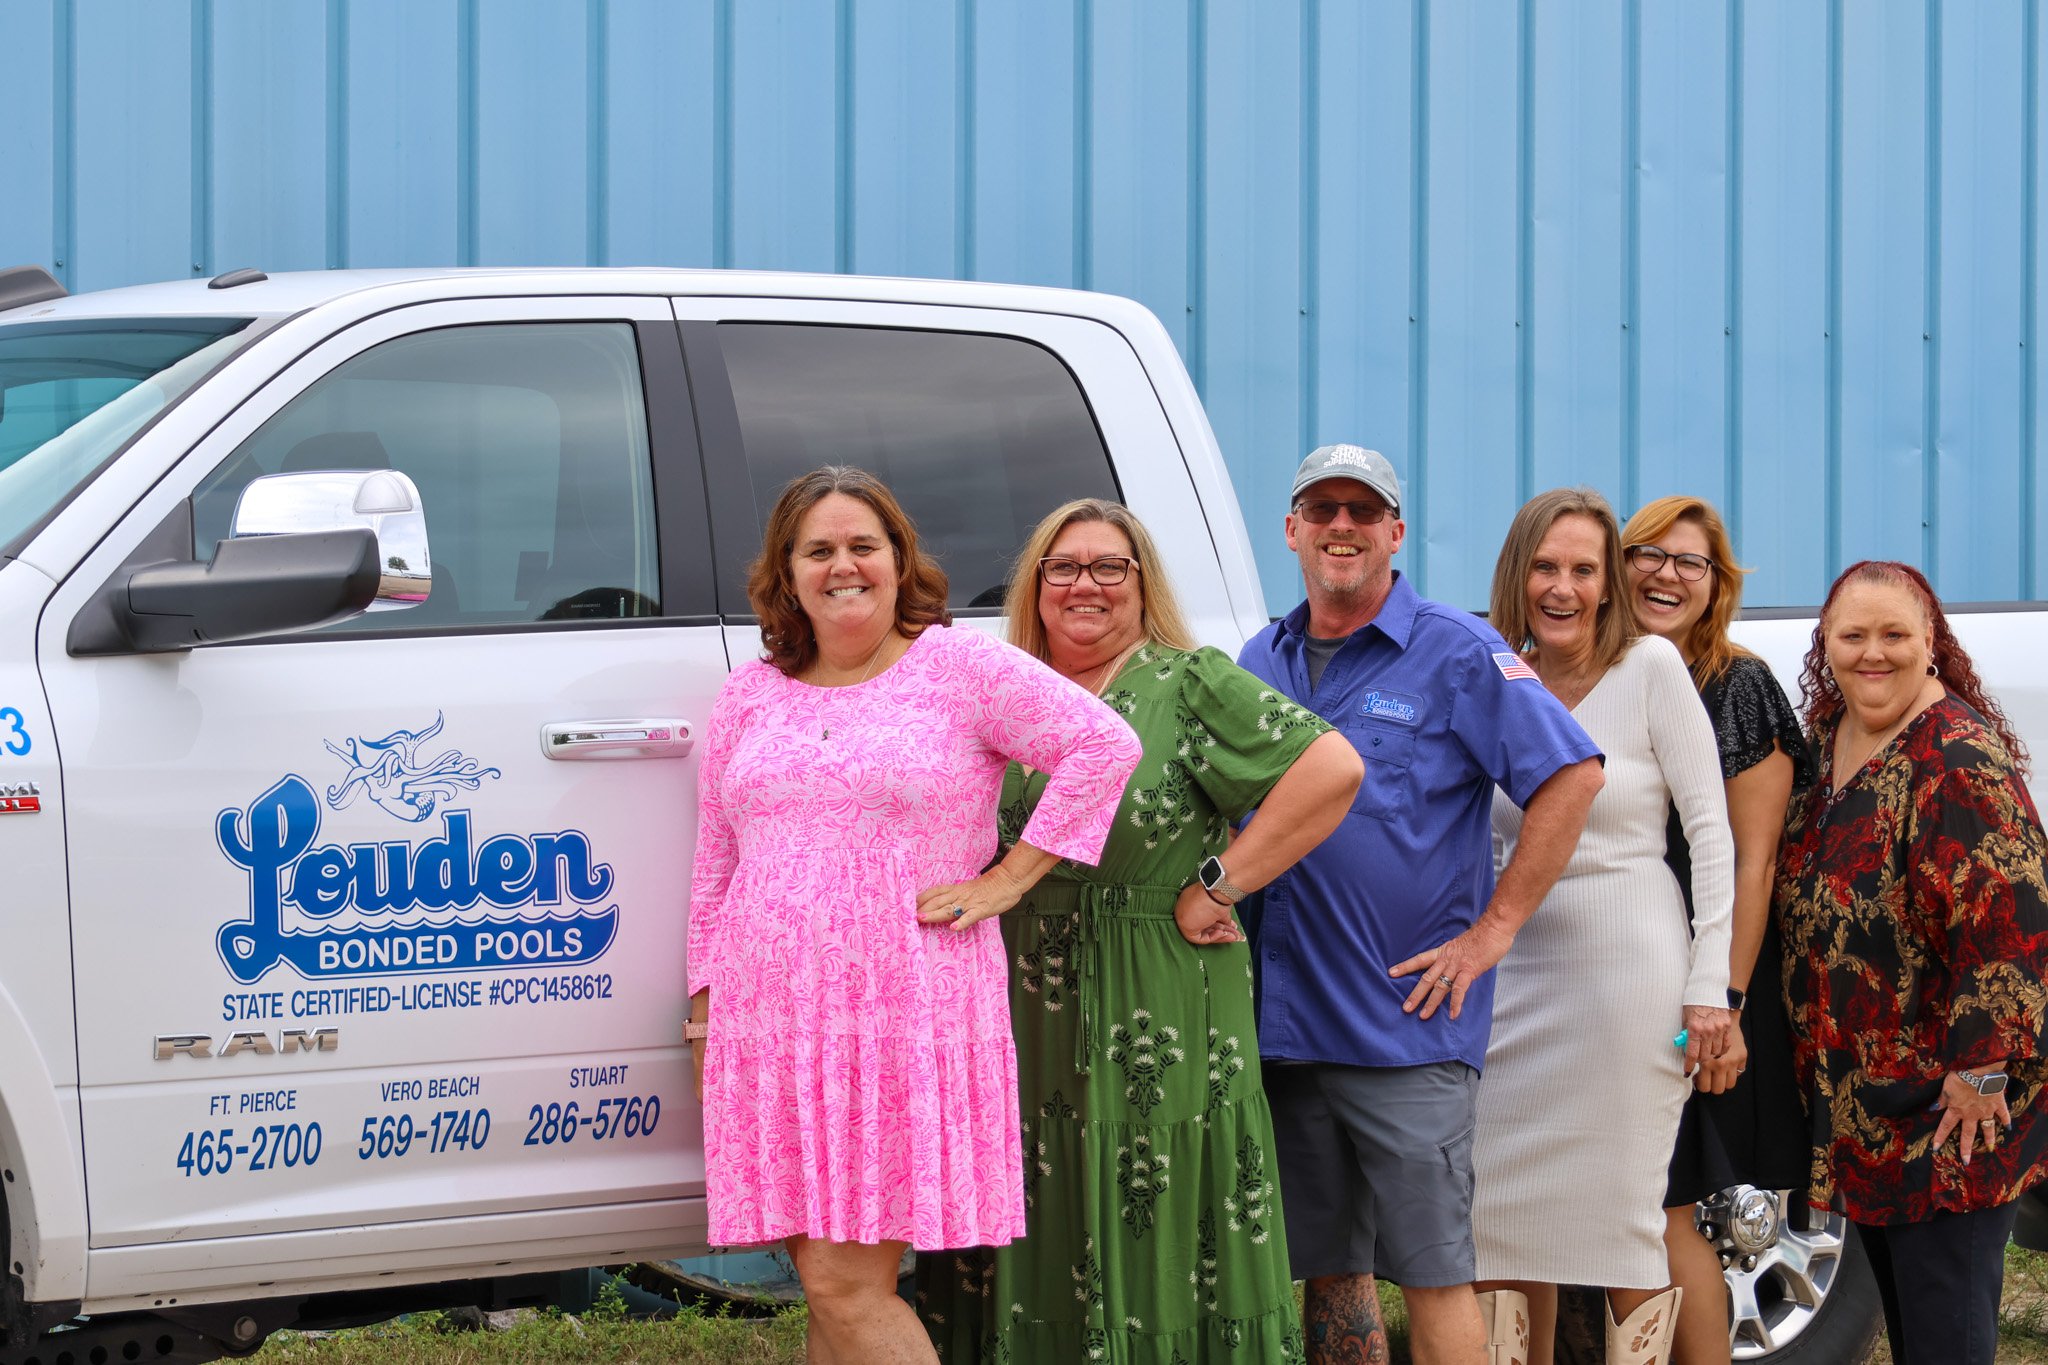 Louden Bonded Pools A Leading Choice for Treasure Coast Homeowners